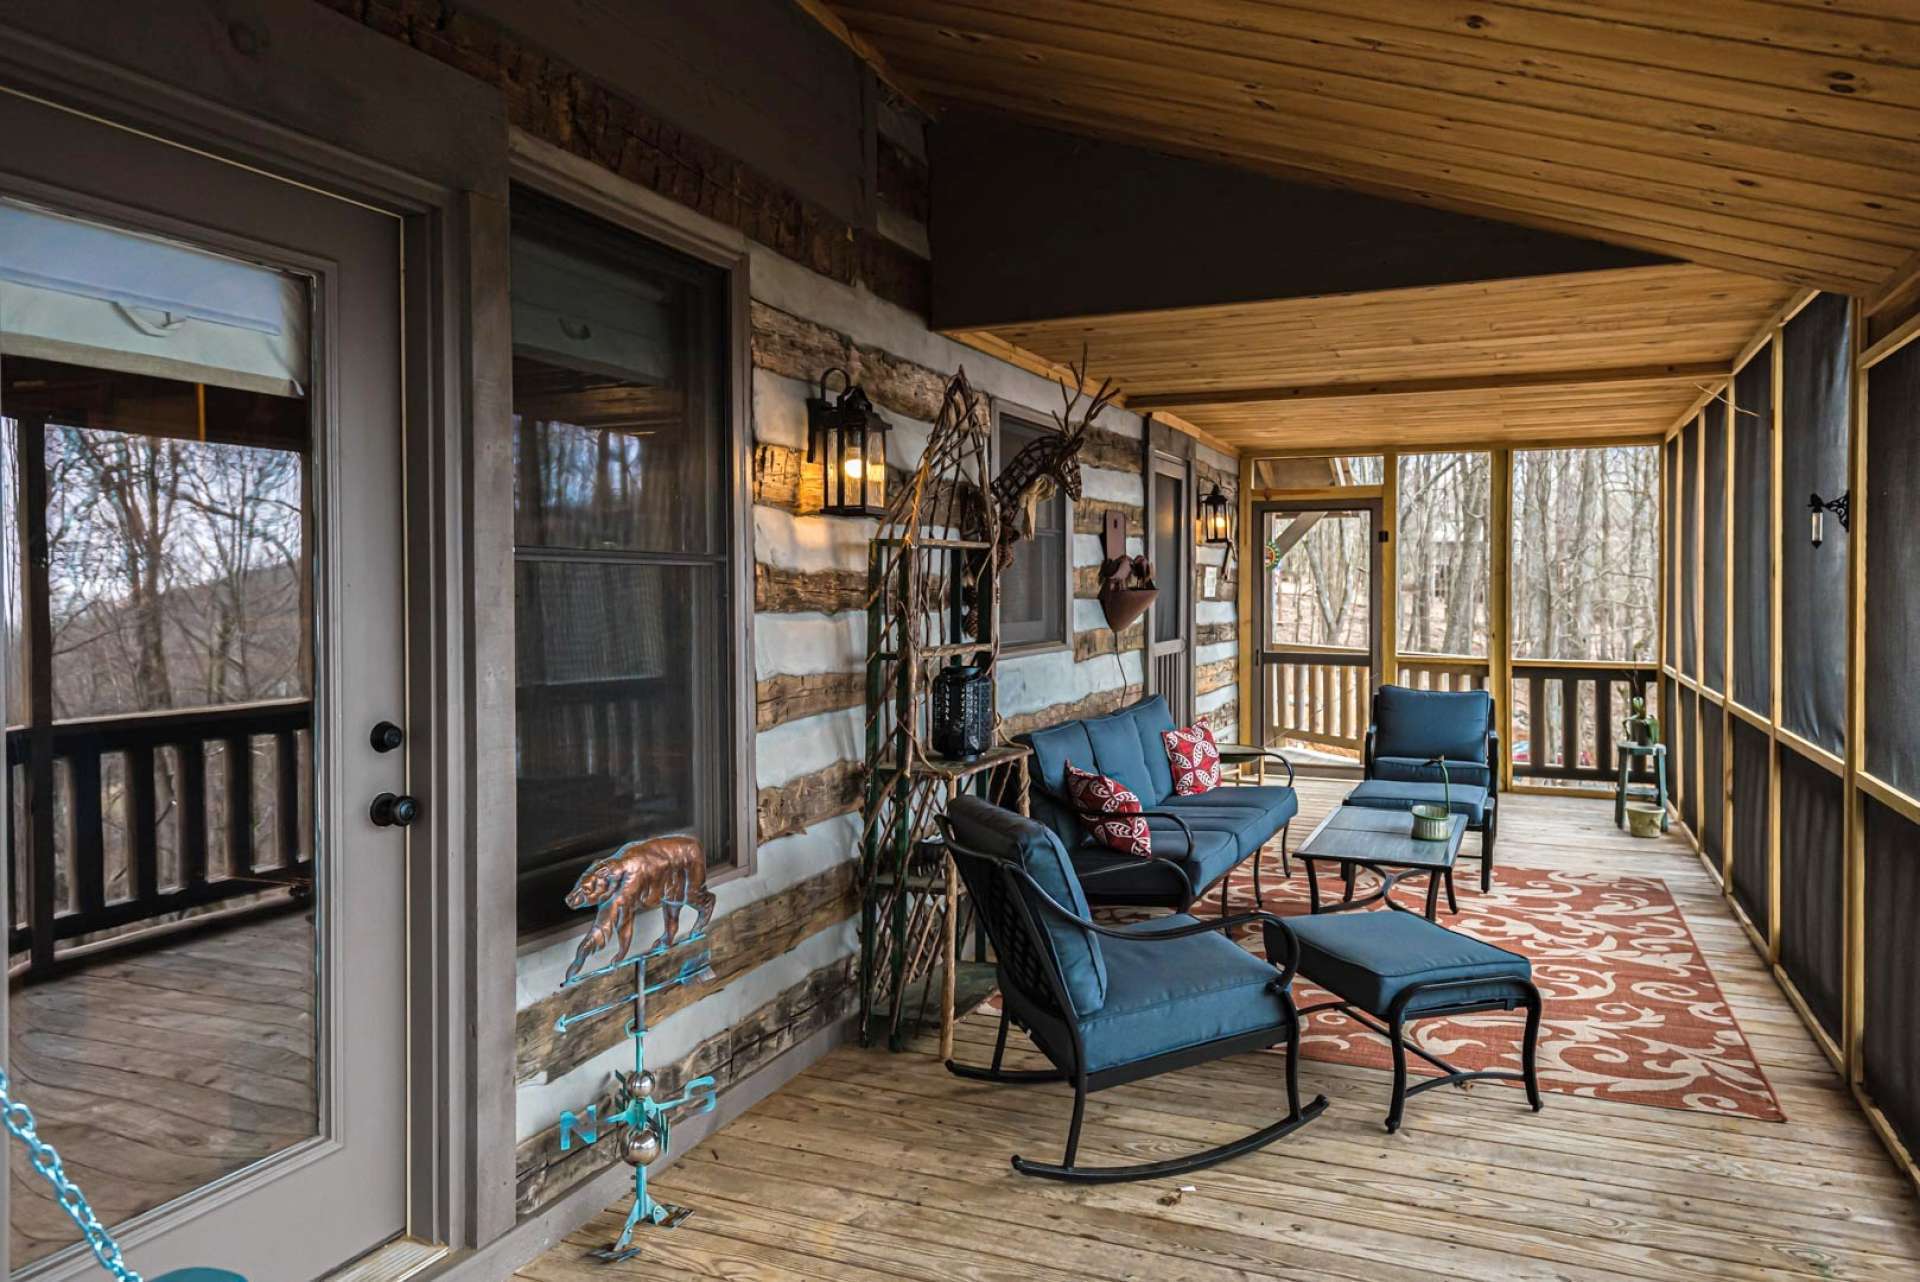 This  screened porch extends the living space during the warmer months.